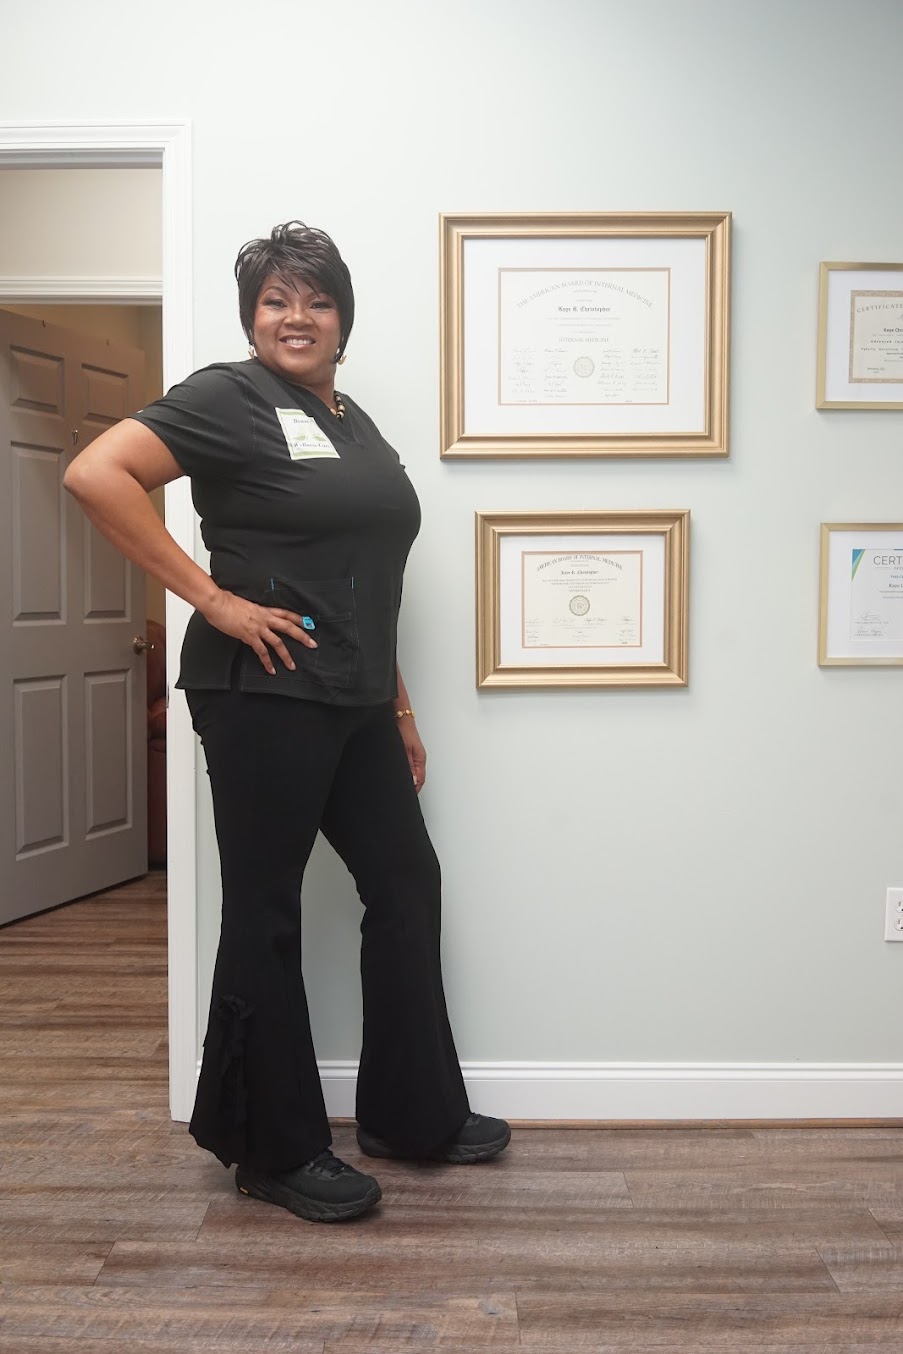 Beauty & Wellness Care is based in Greenville South Carolina Beauty & Wellness Care | Dr. Kaye Christopher, MD | Greenville, SC Greenville (843)806-3994